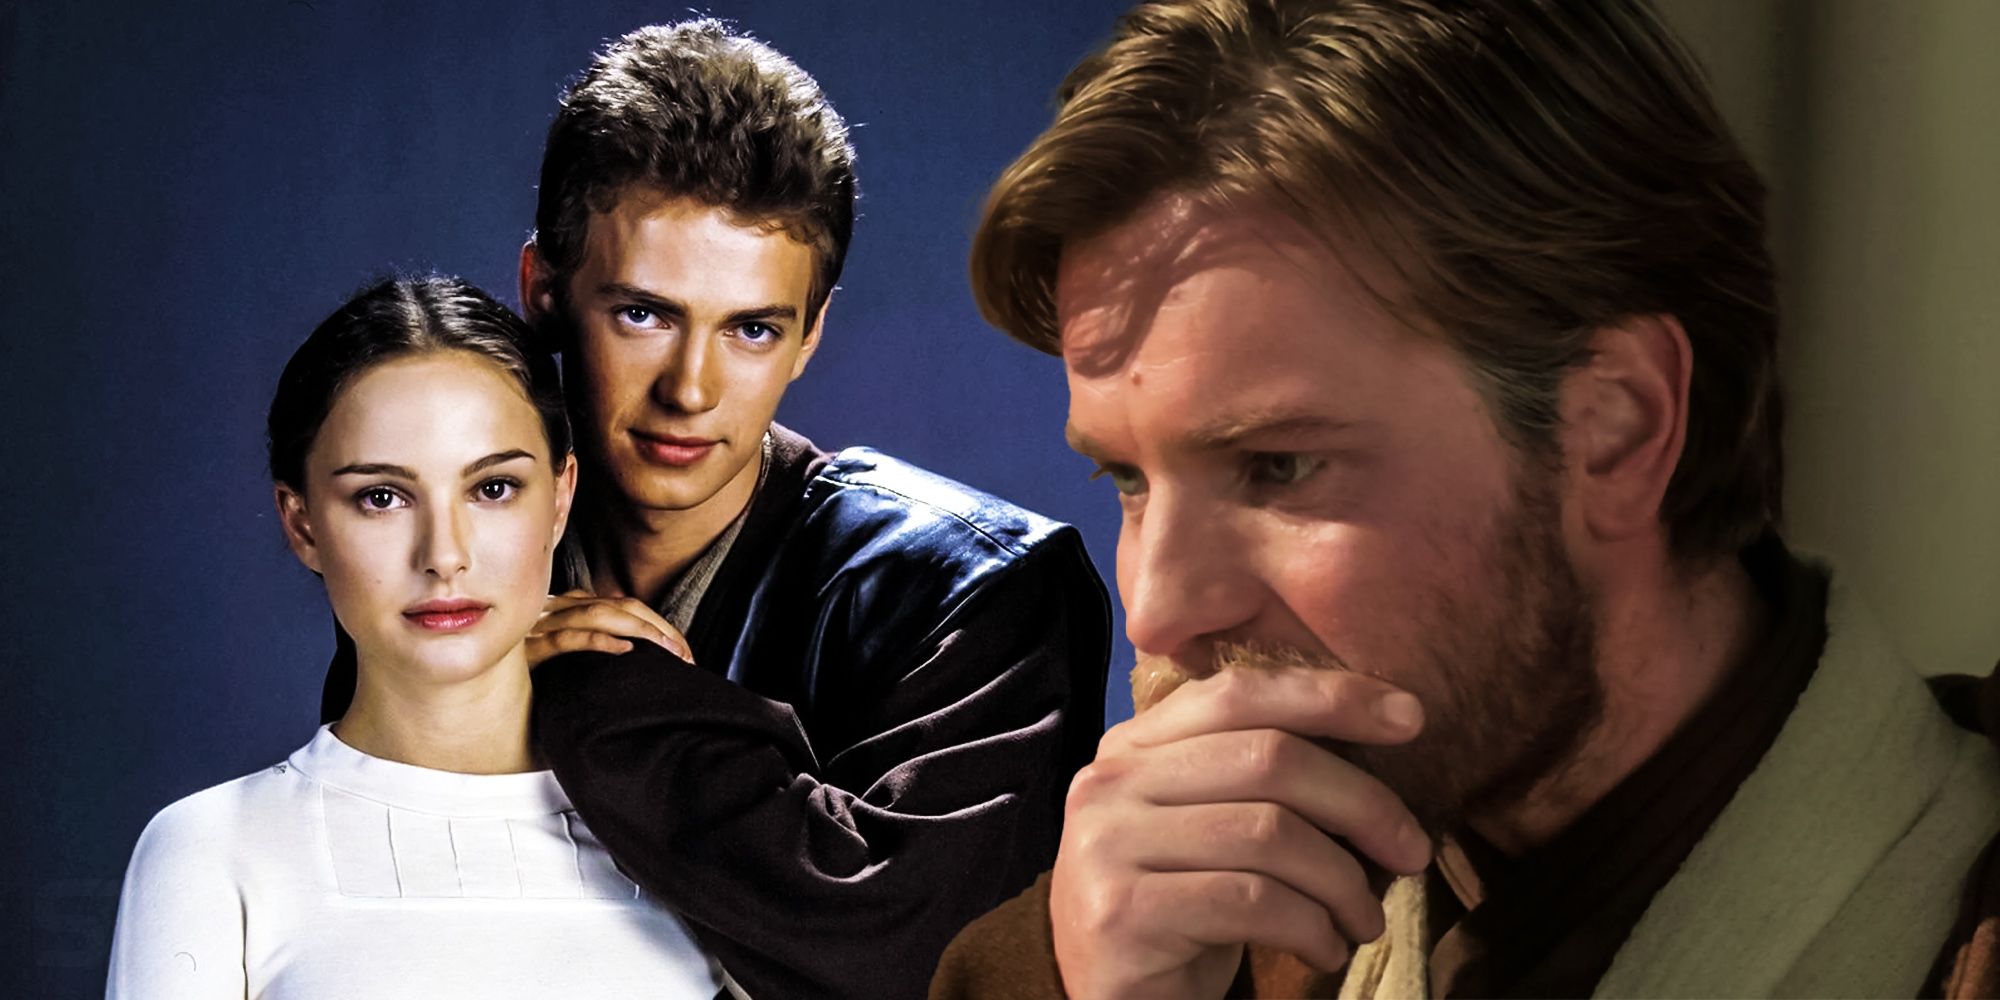 Obi wan knew about anakin and padme